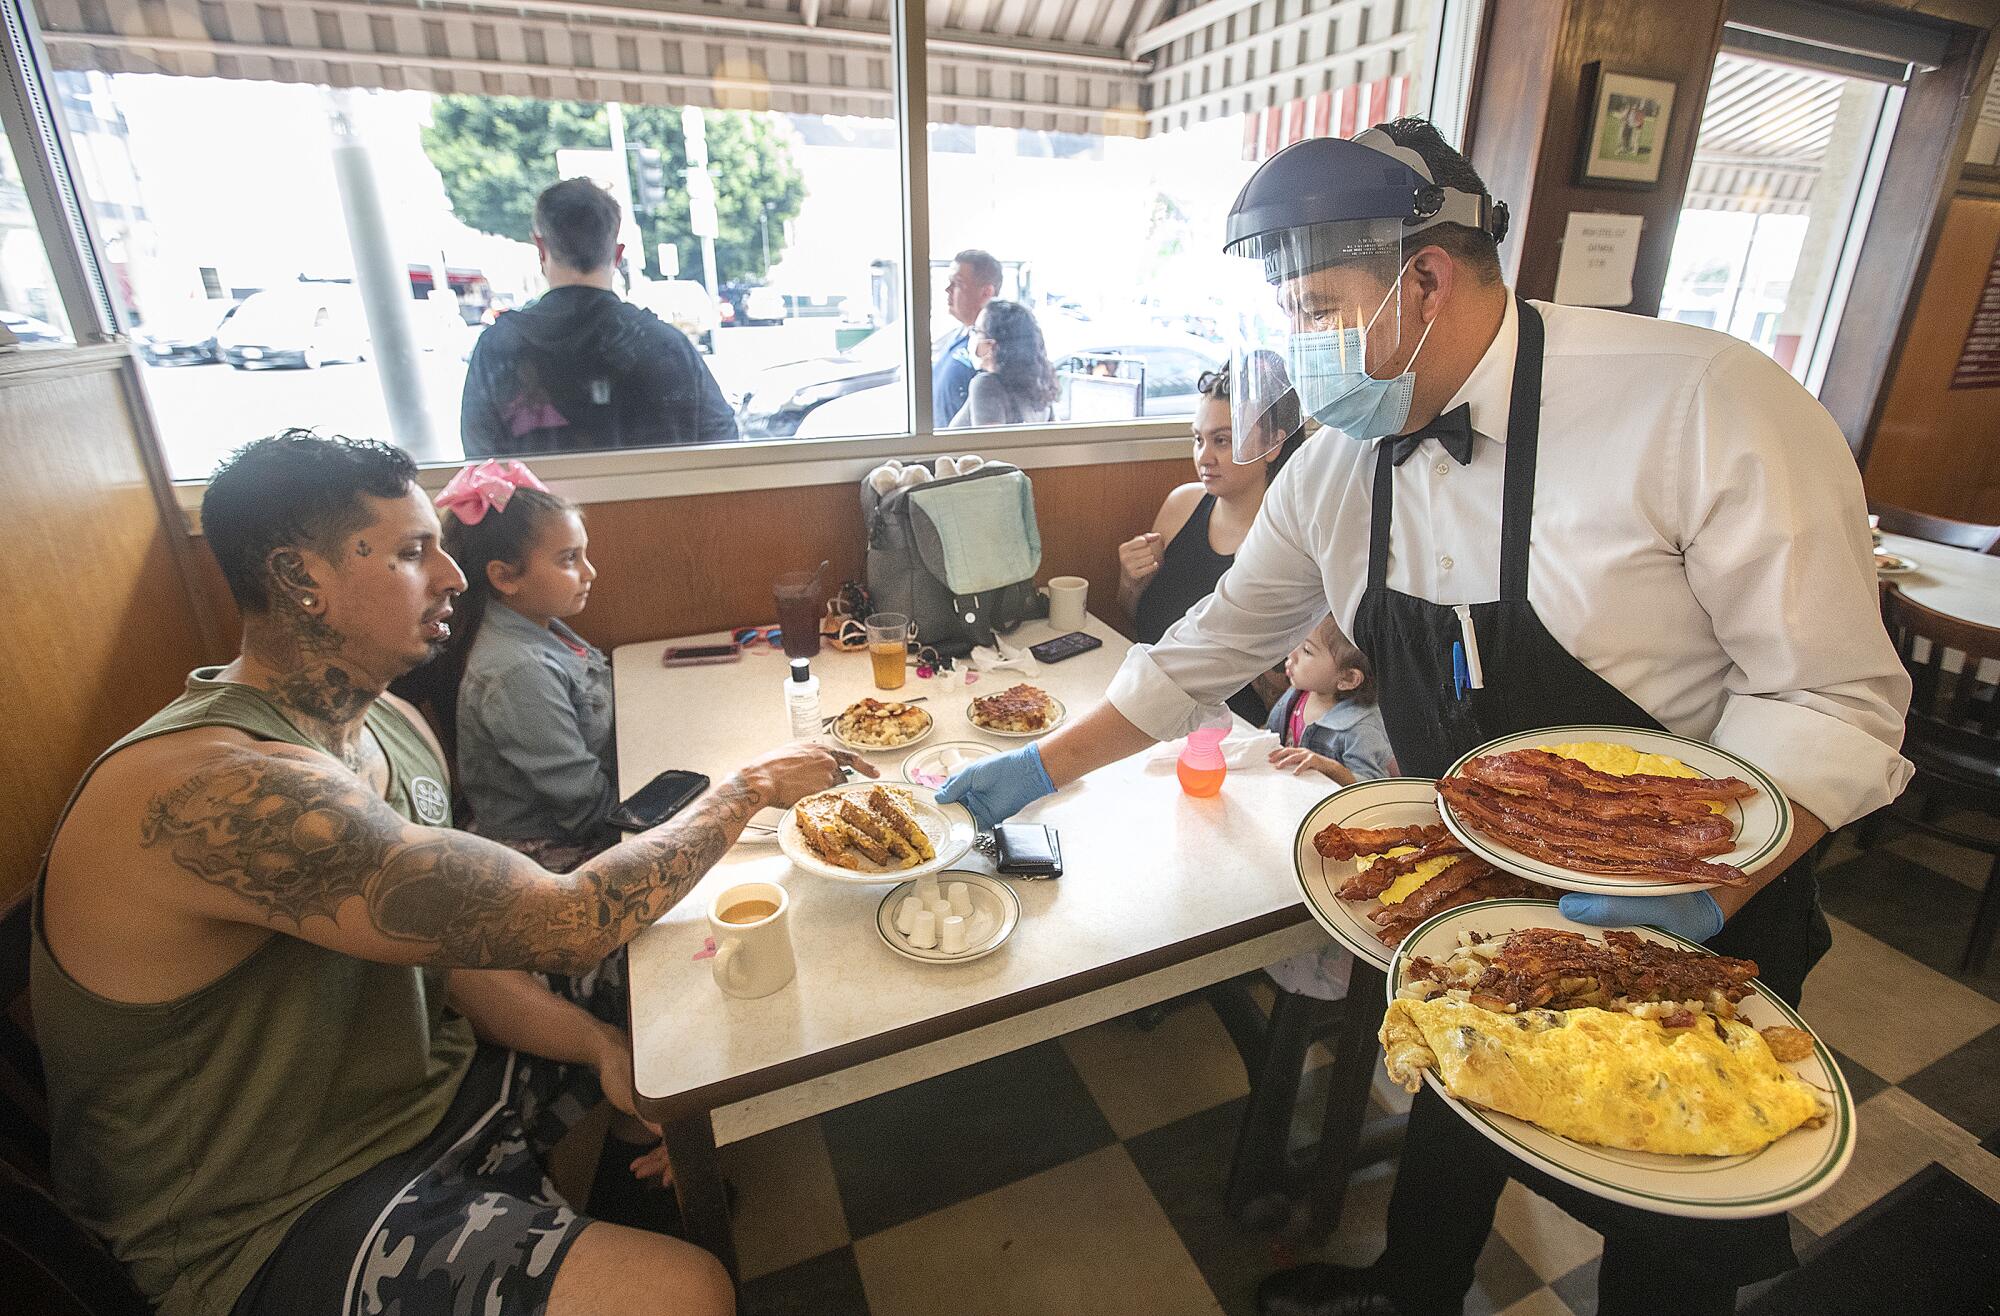 Jesus Segura, right, serves customers at the Original Pantry in downtown Los Angeles on Wednesday.